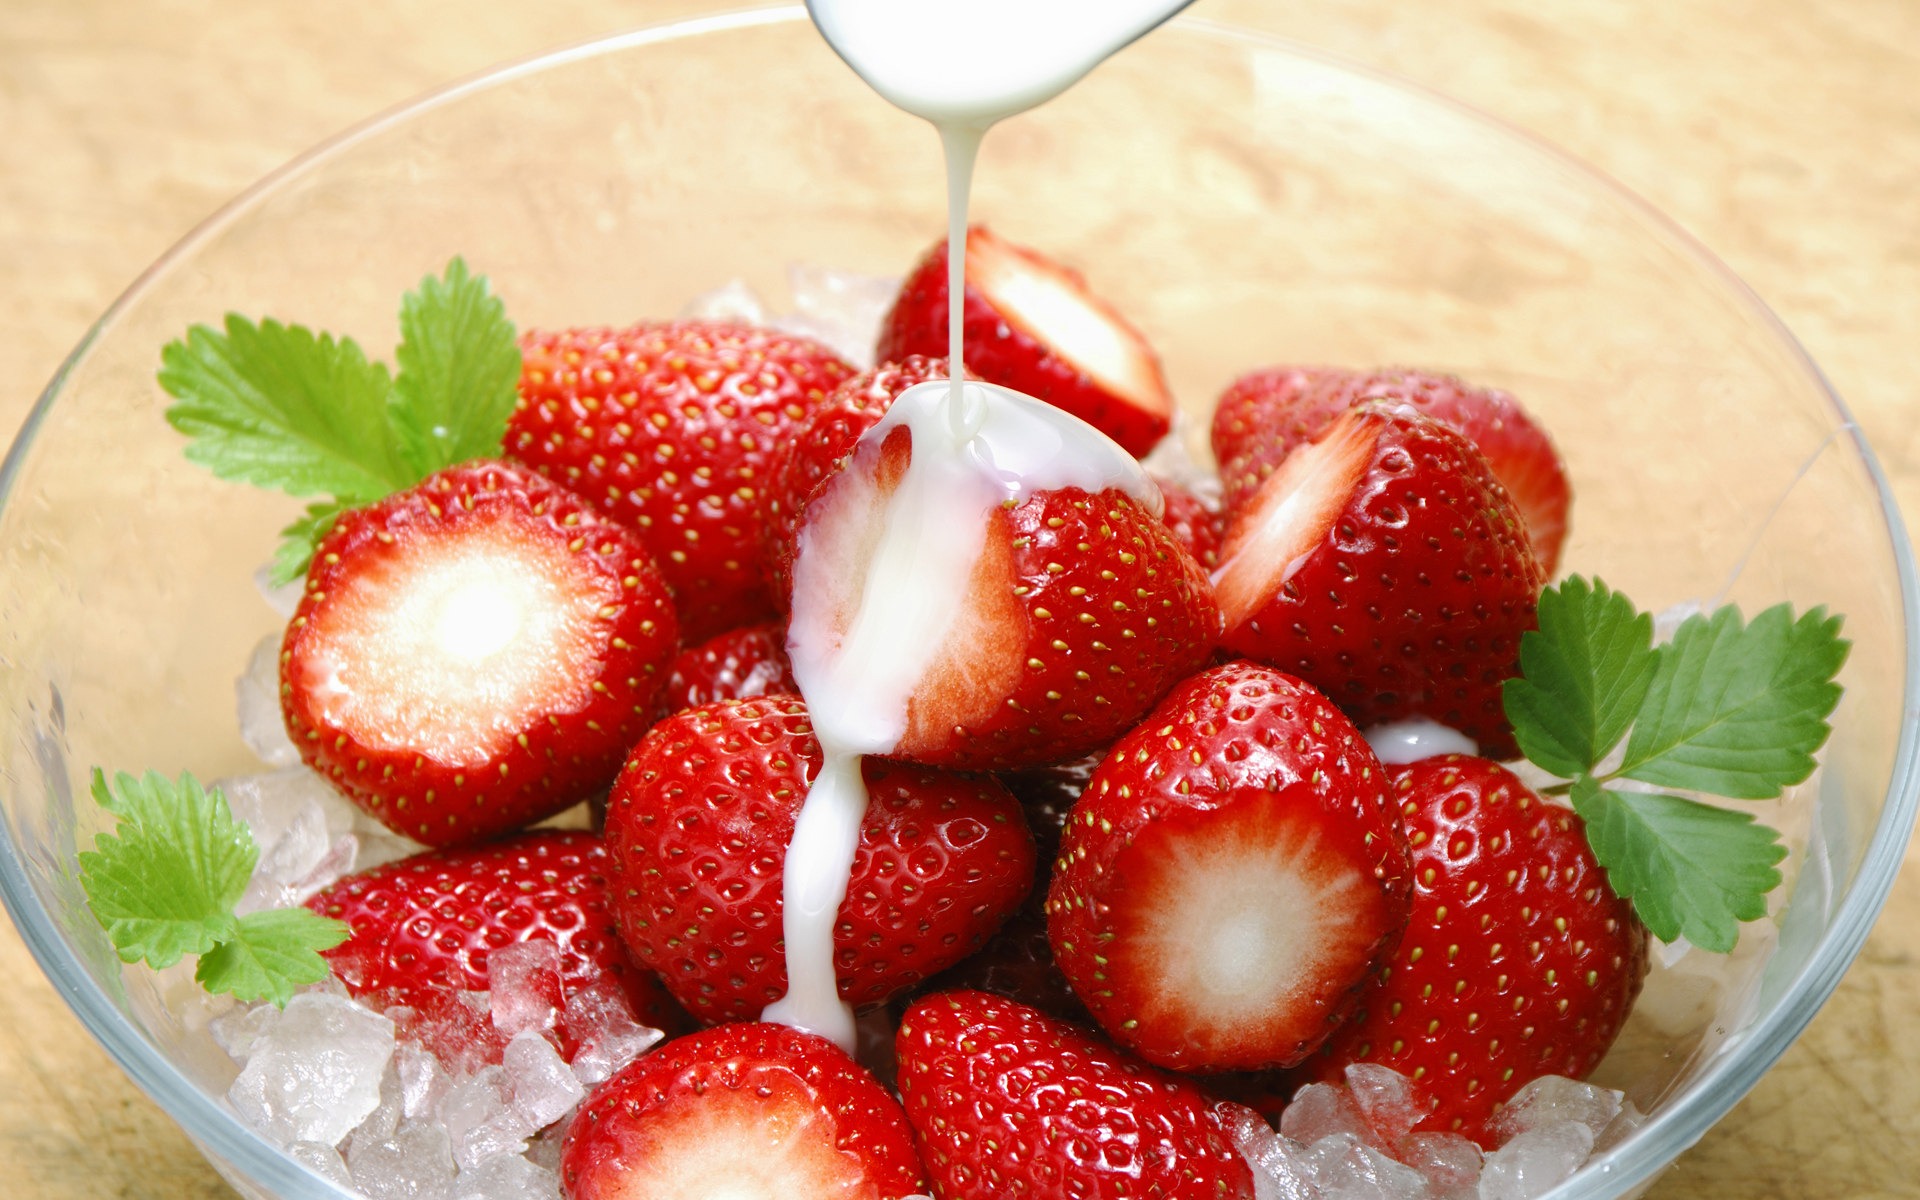 fresh strawberries wallpapers 1920x1200 86119 Strawberries are a Low Calorie Delicious Healthy Snack Alternative